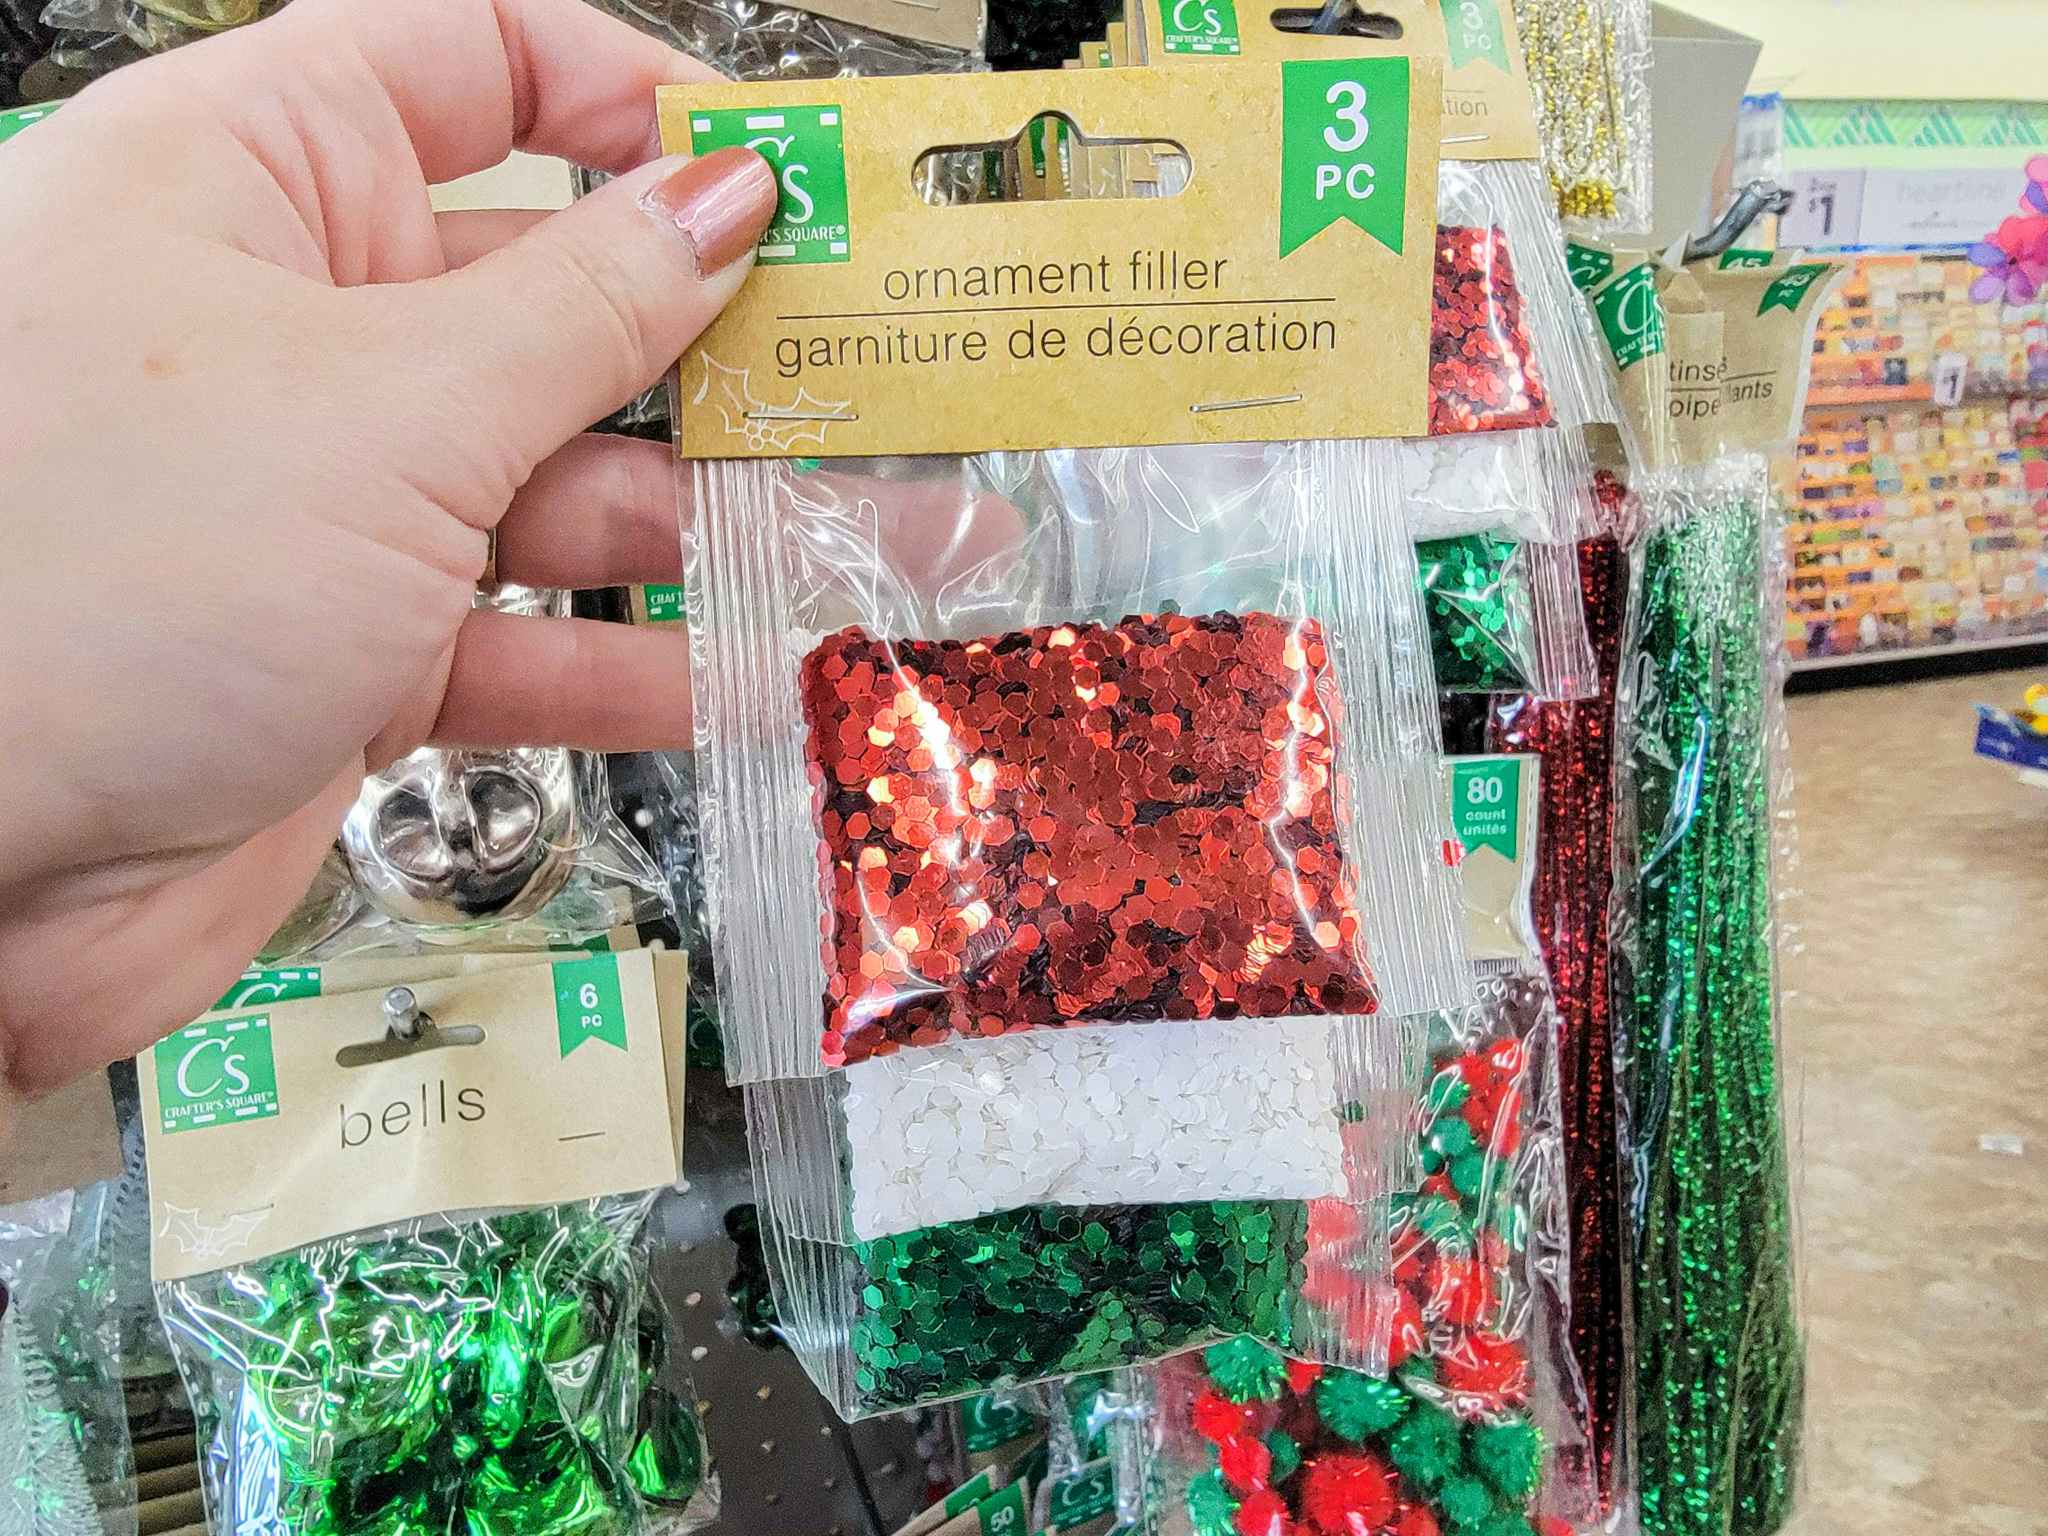 hand holding ornament filler in christmas colors